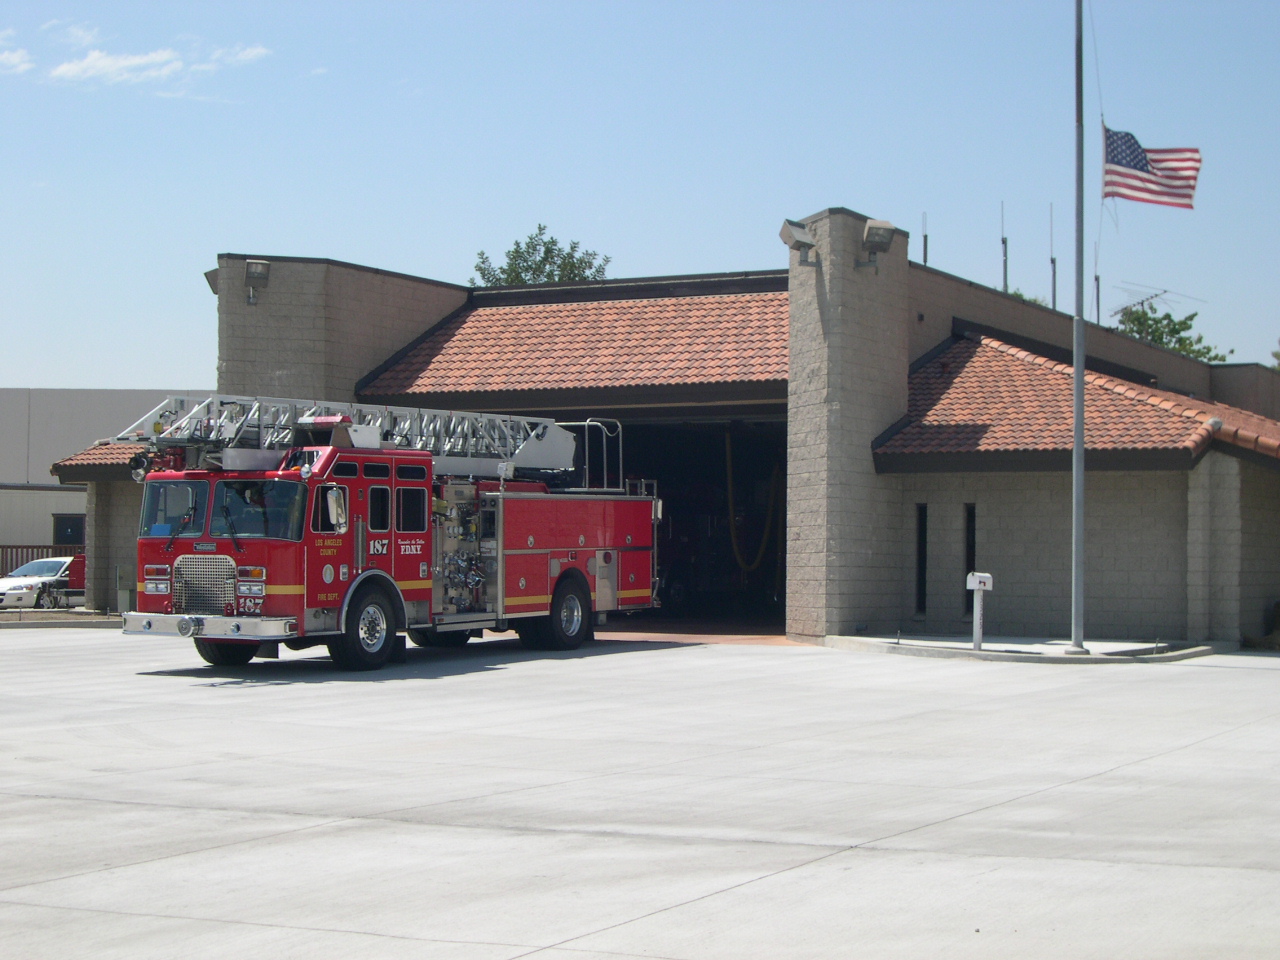 Firetruck 187 parked outside its station. American flag raised high next to it.